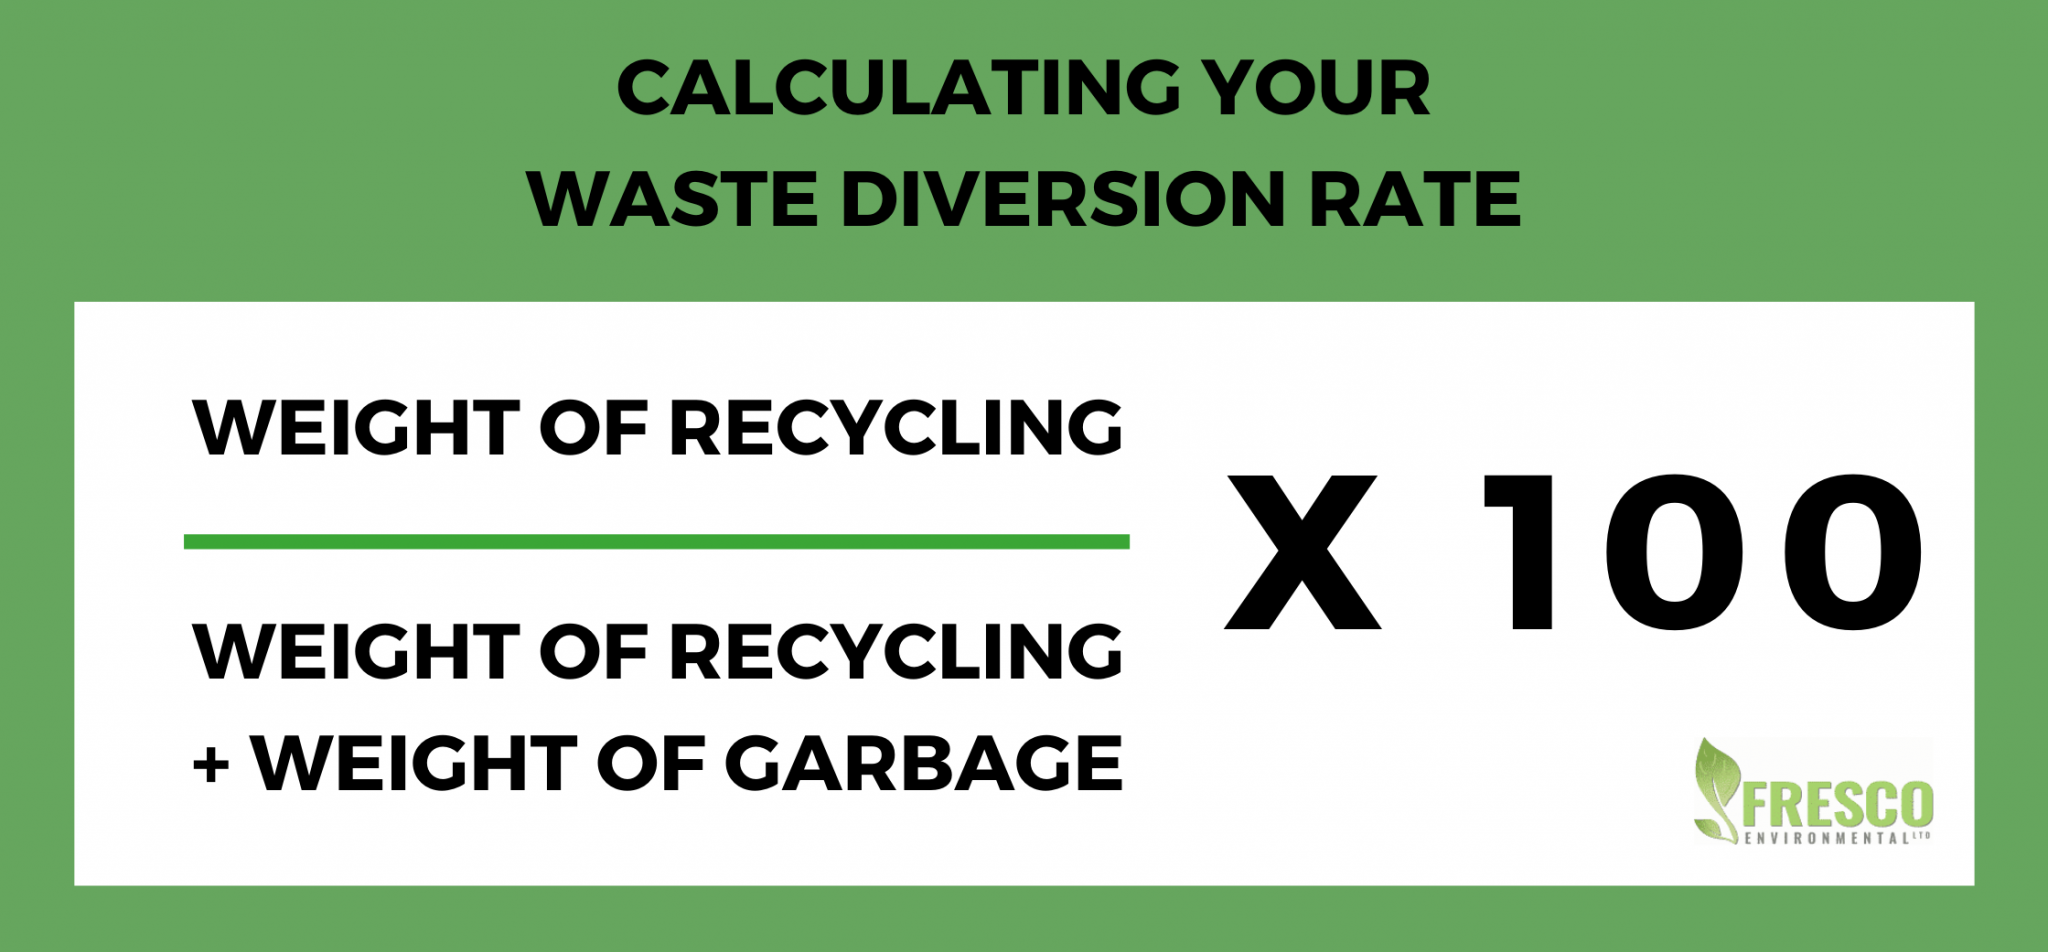 formula for calculating your Waste Diversion Rate